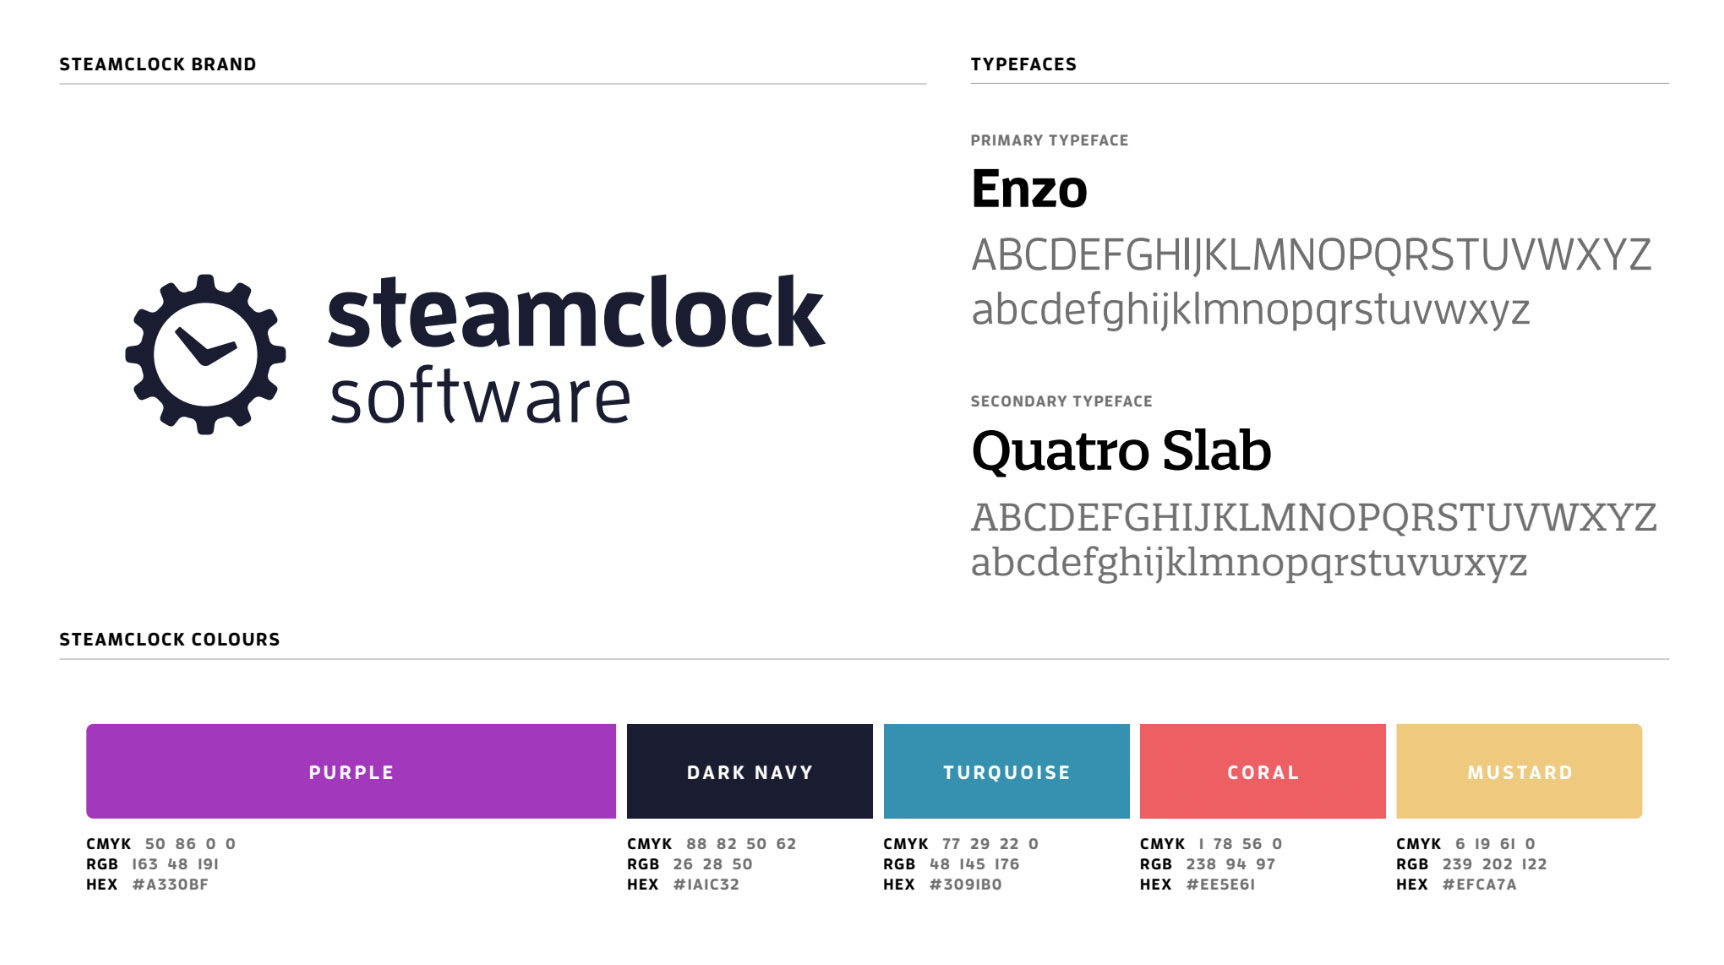 Steamclock brand guide showing Enzo primary typeface and Quatro Slab secondary typeface alongside the color palette